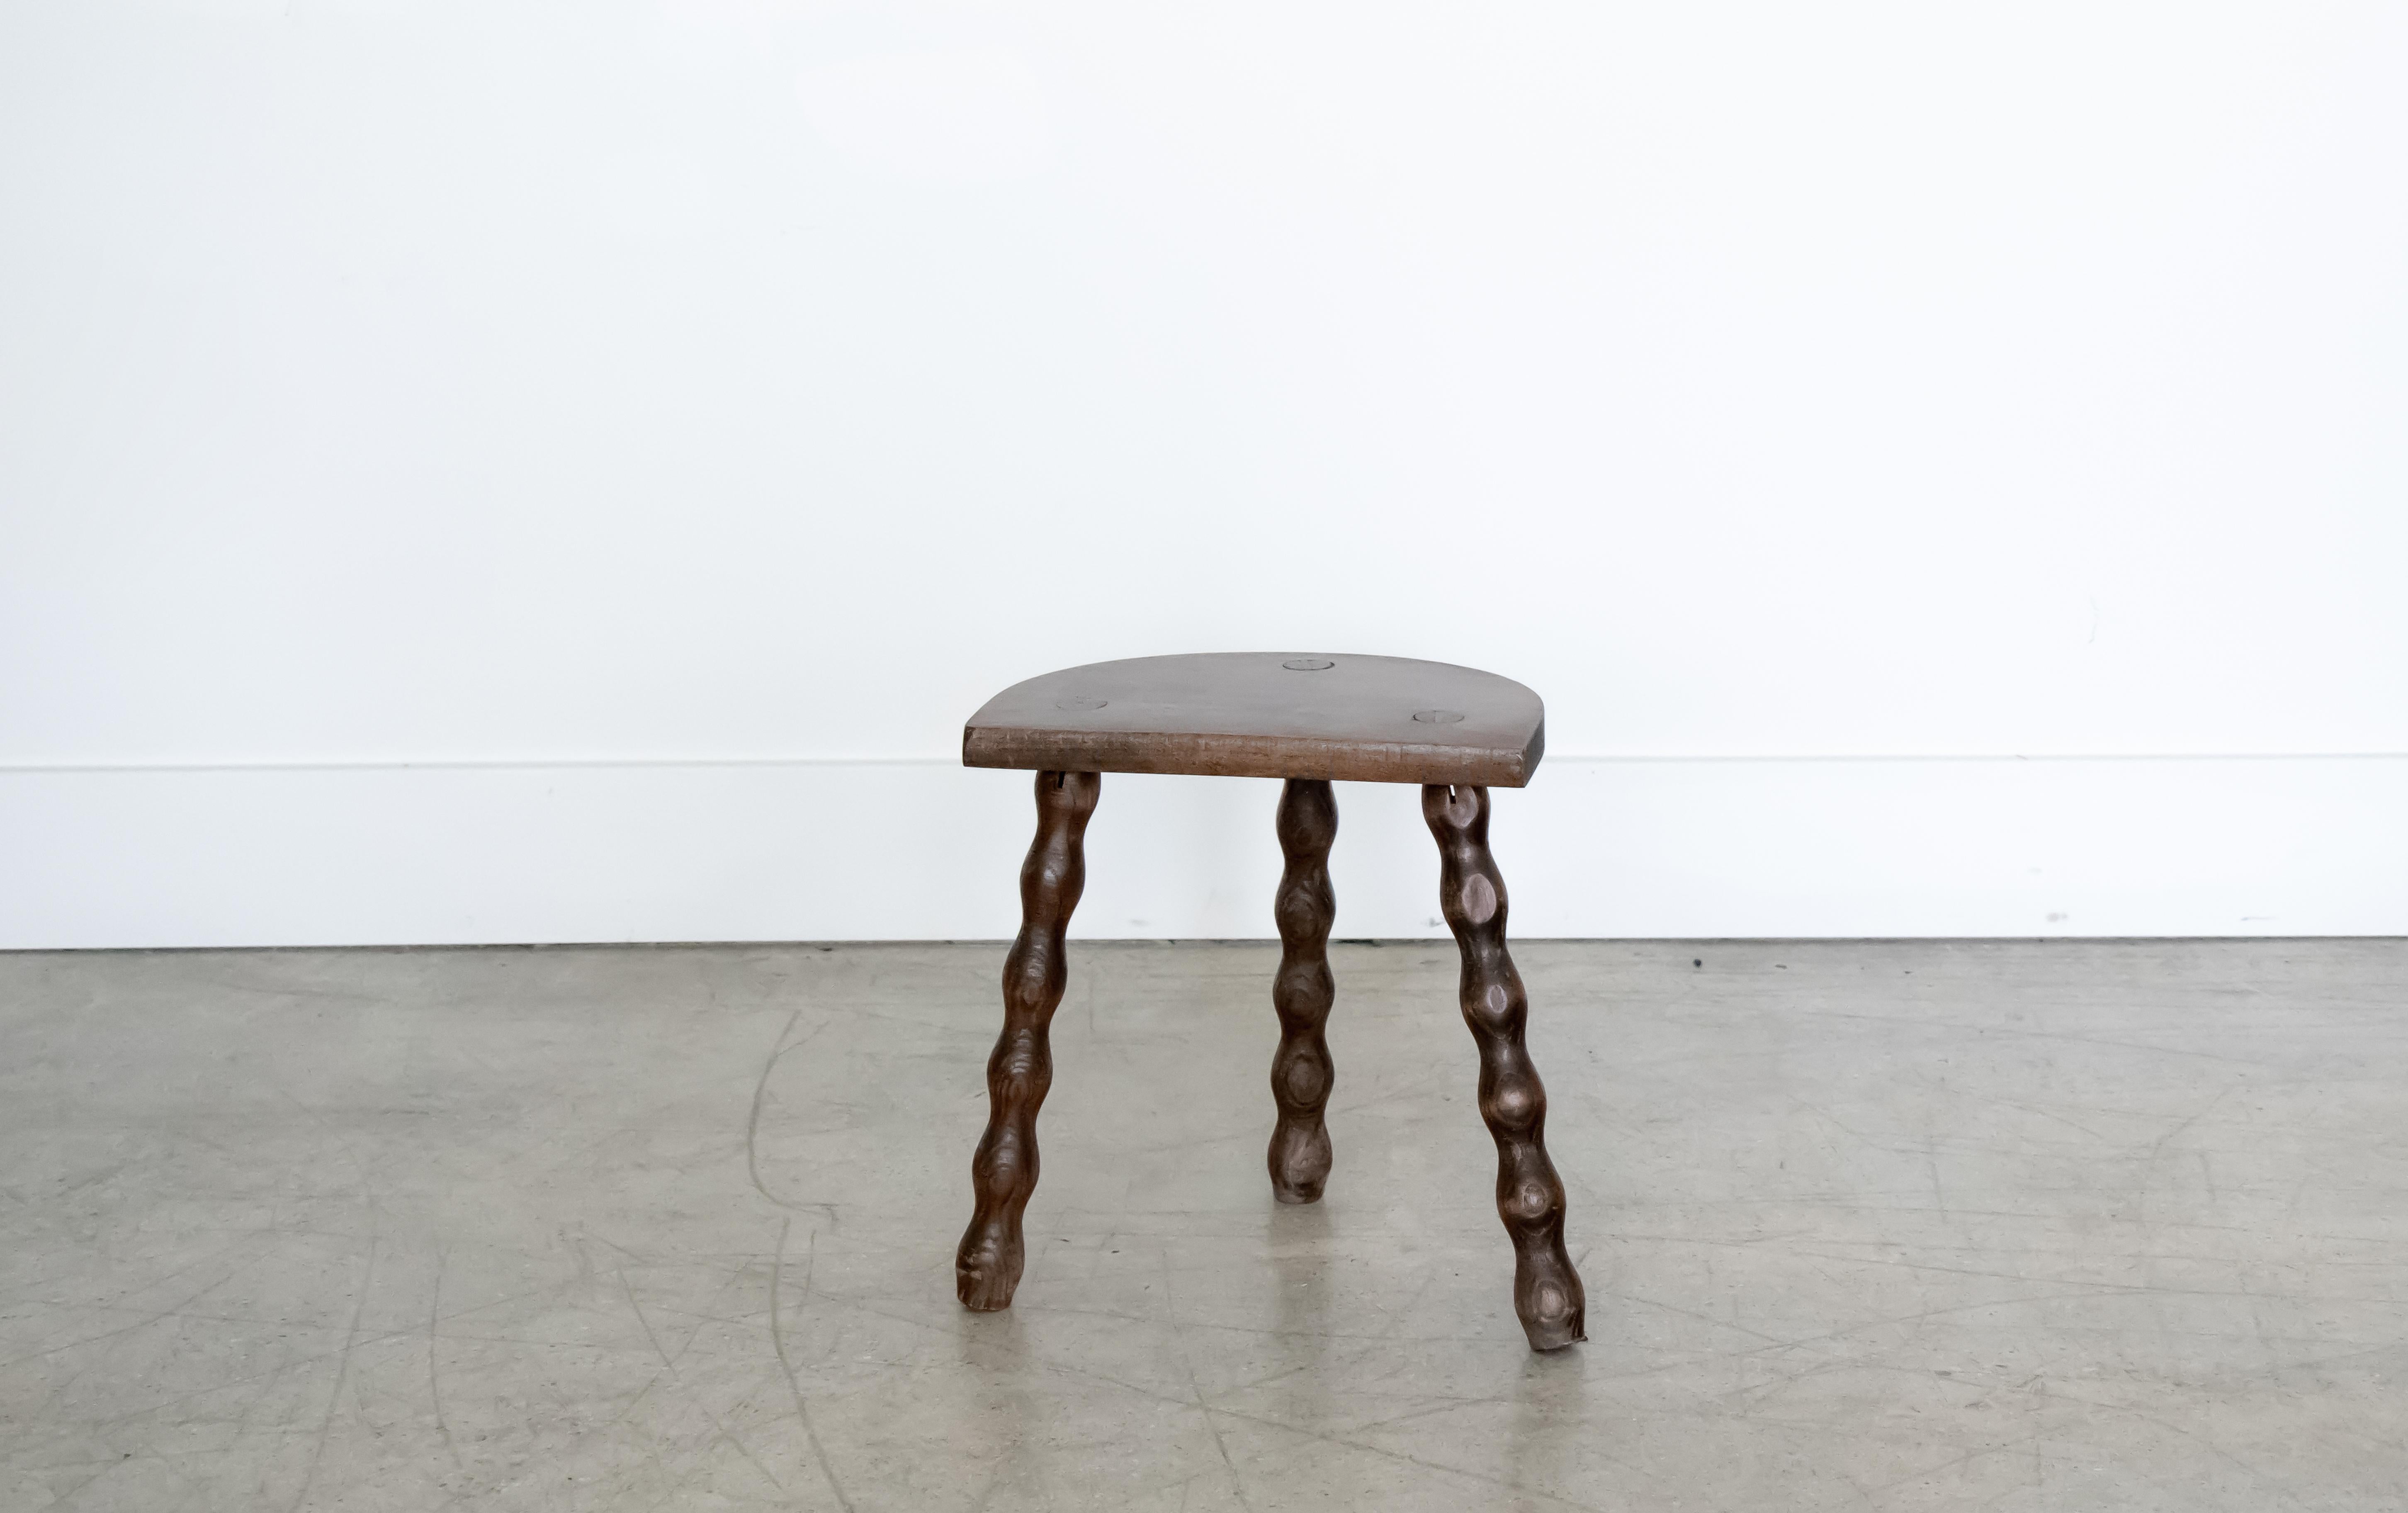 Vintage wood stool with beautiful wavy tripod legs from France. Original dark wood finish with great age markings and patina. Can be used as a small stool or as side table next to chairs. 

 